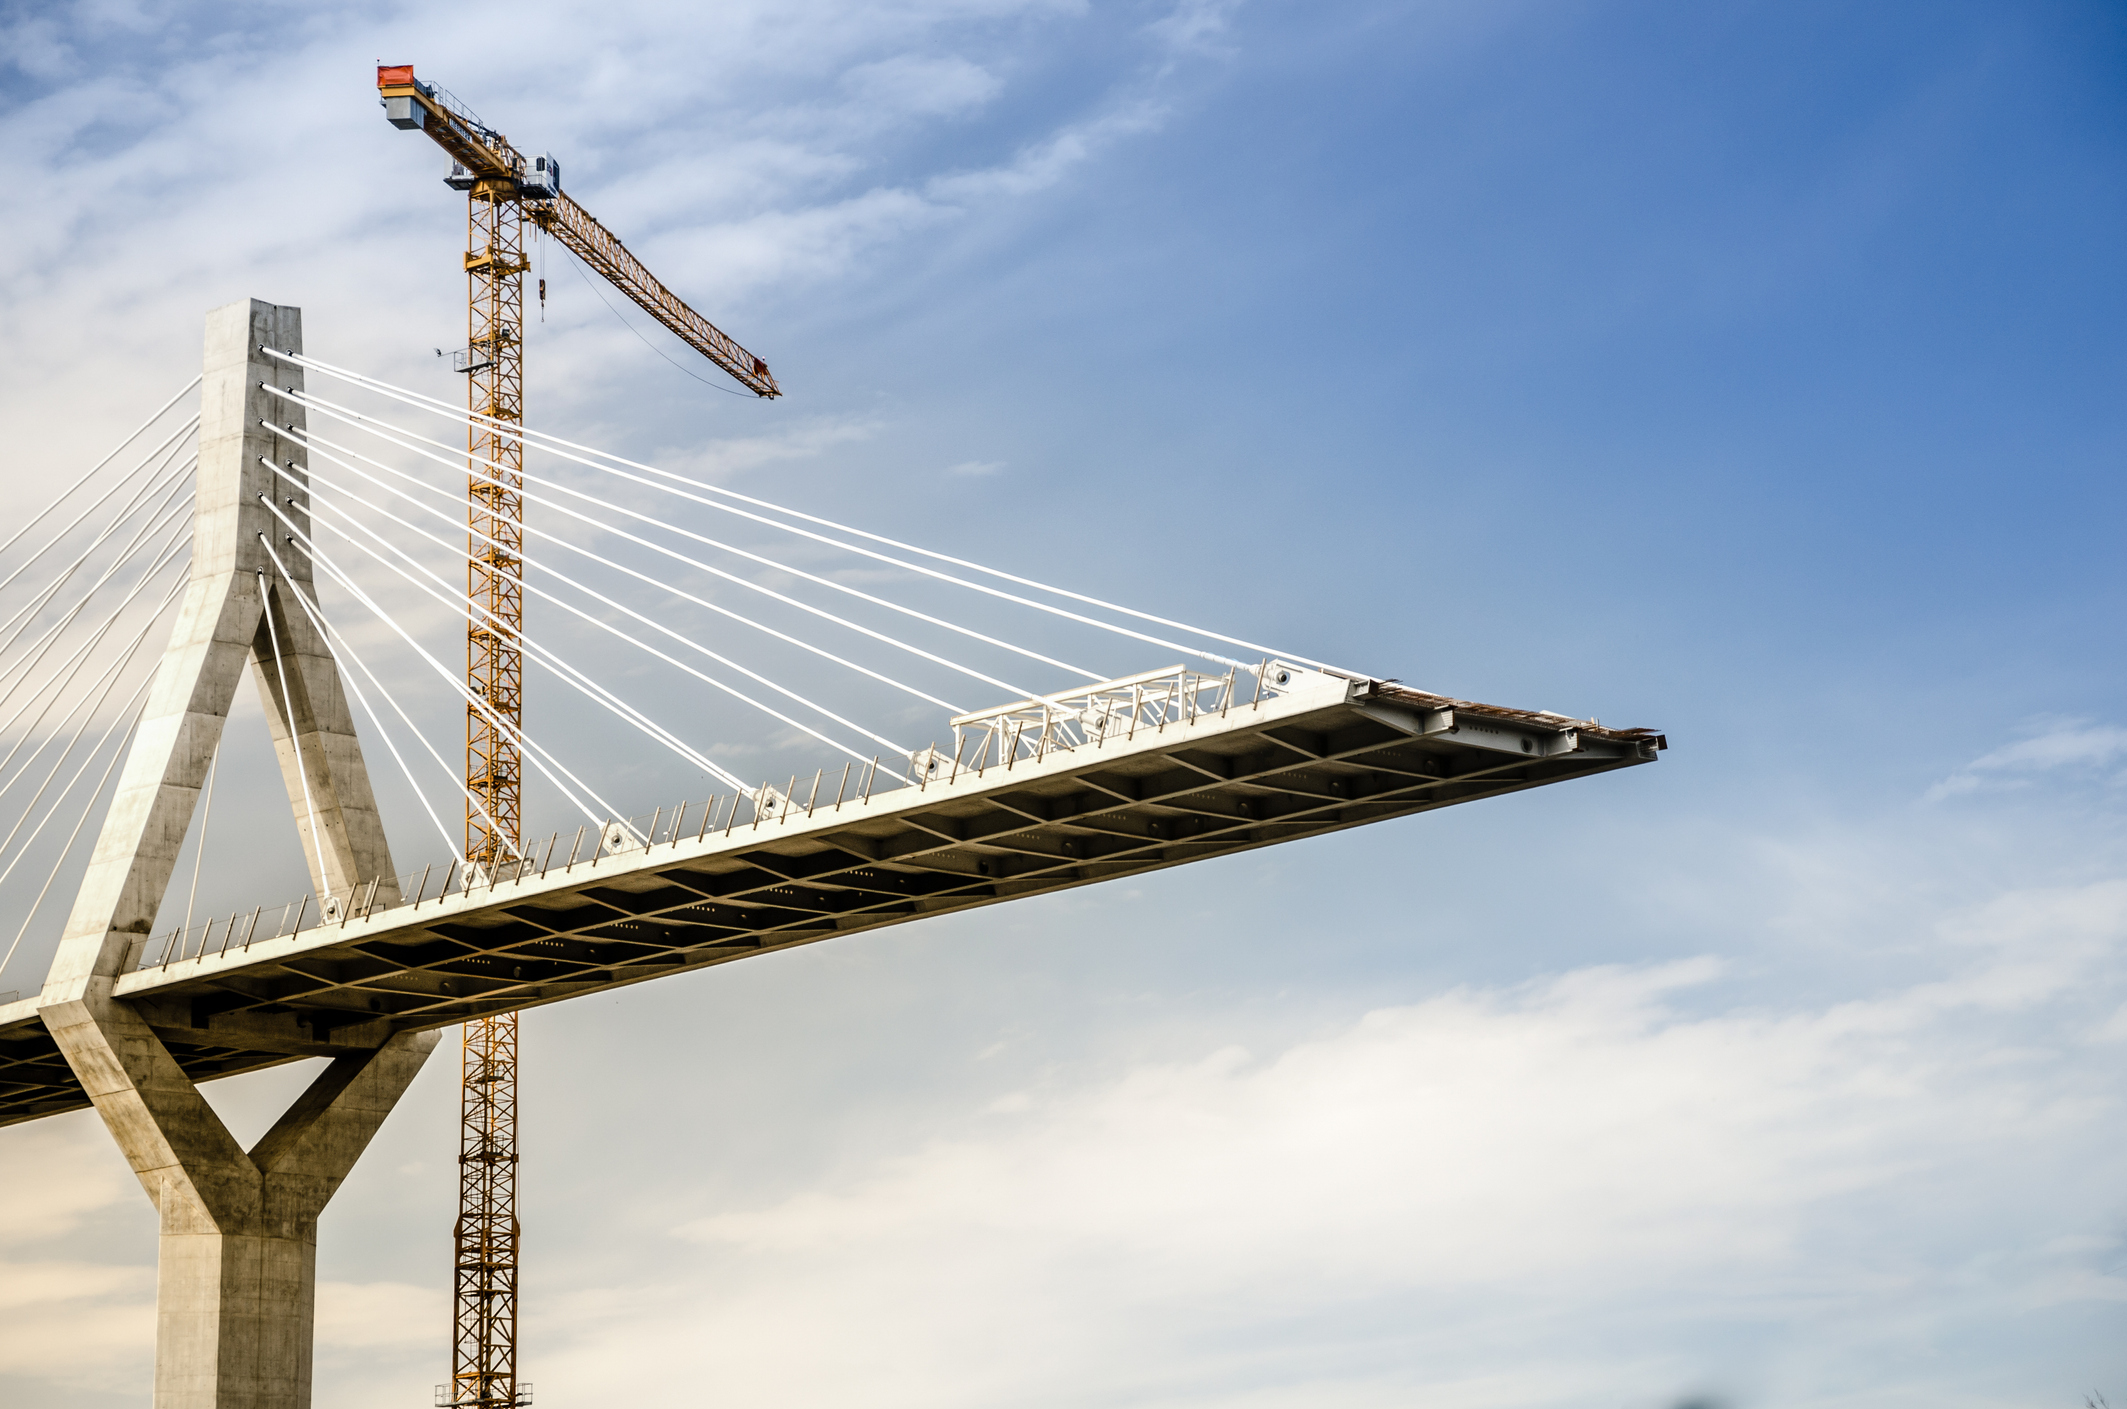 Build bridges bravely and create a positive work environment.